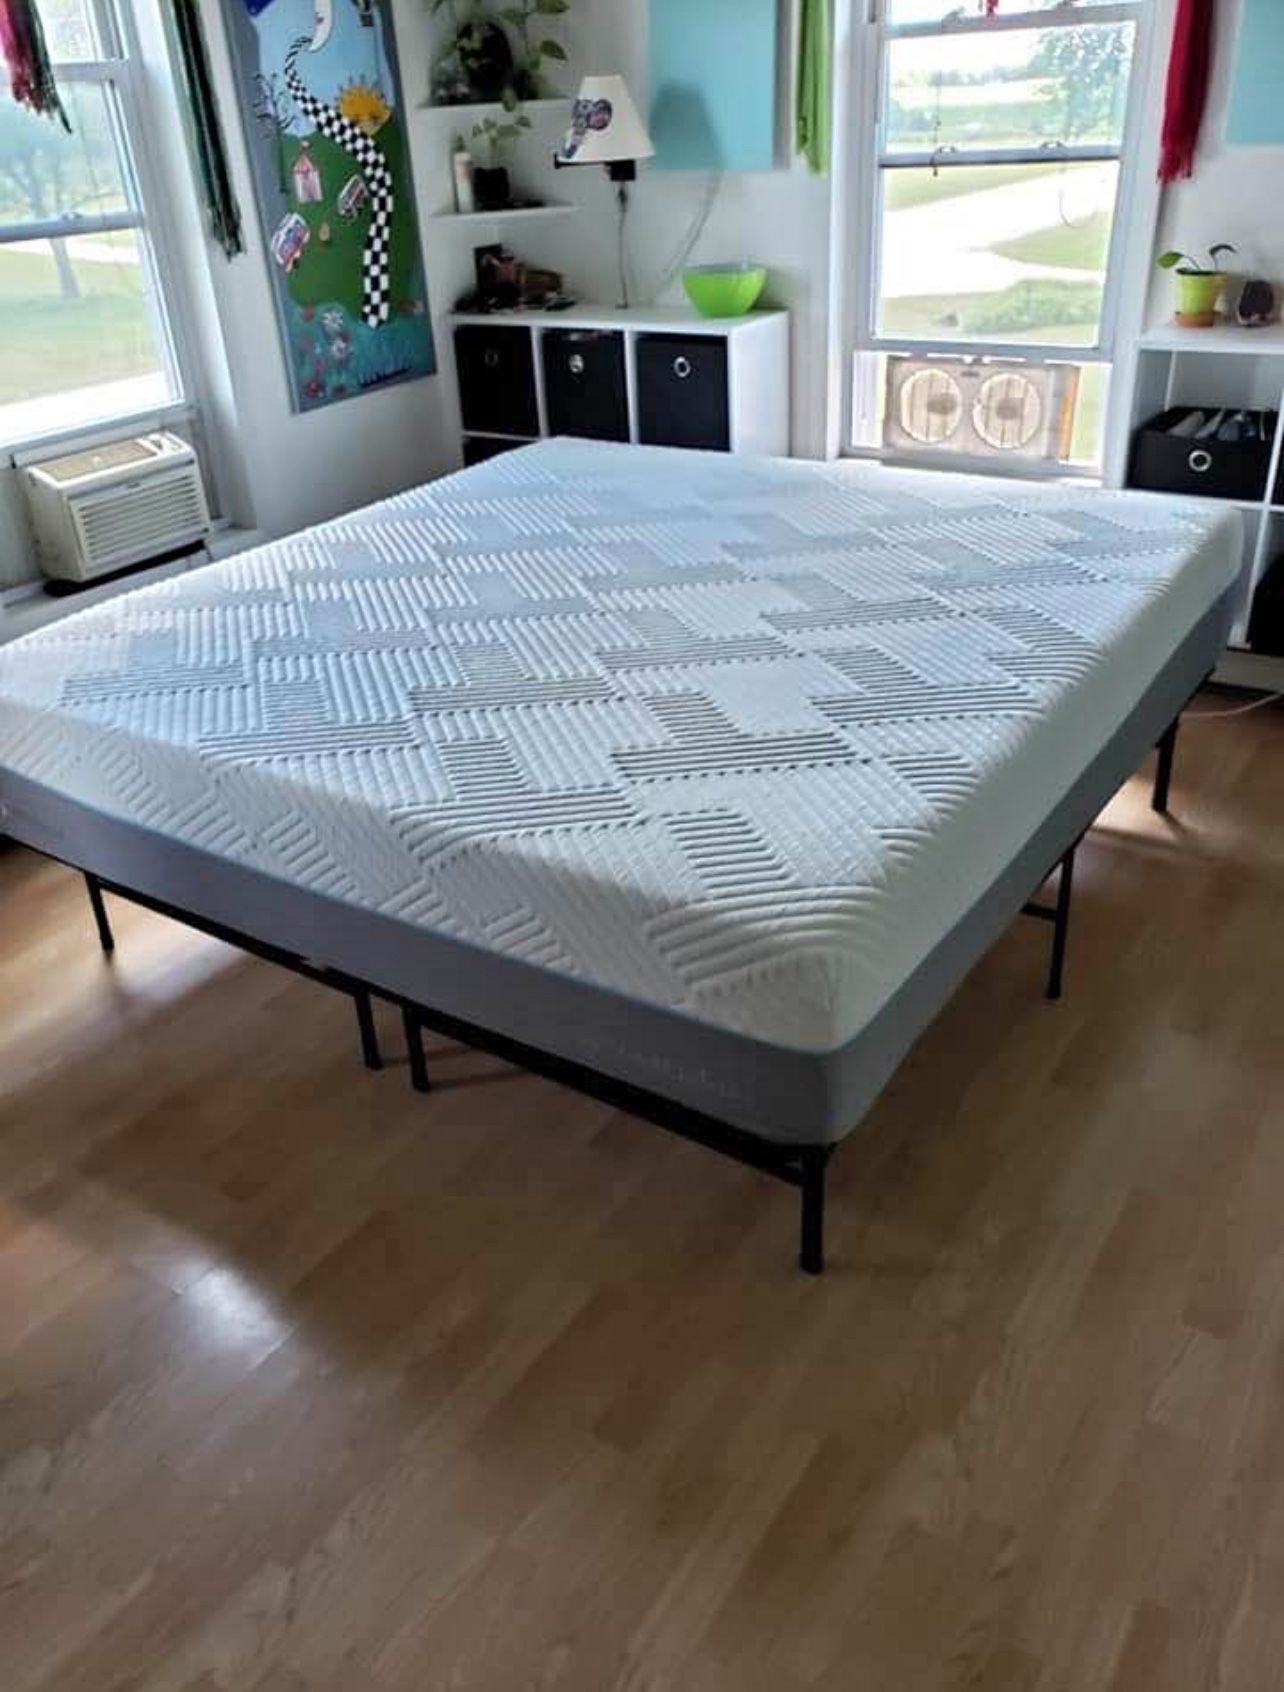 Mattress Sale! Several Styles to Choose From, All Sizes in Stock